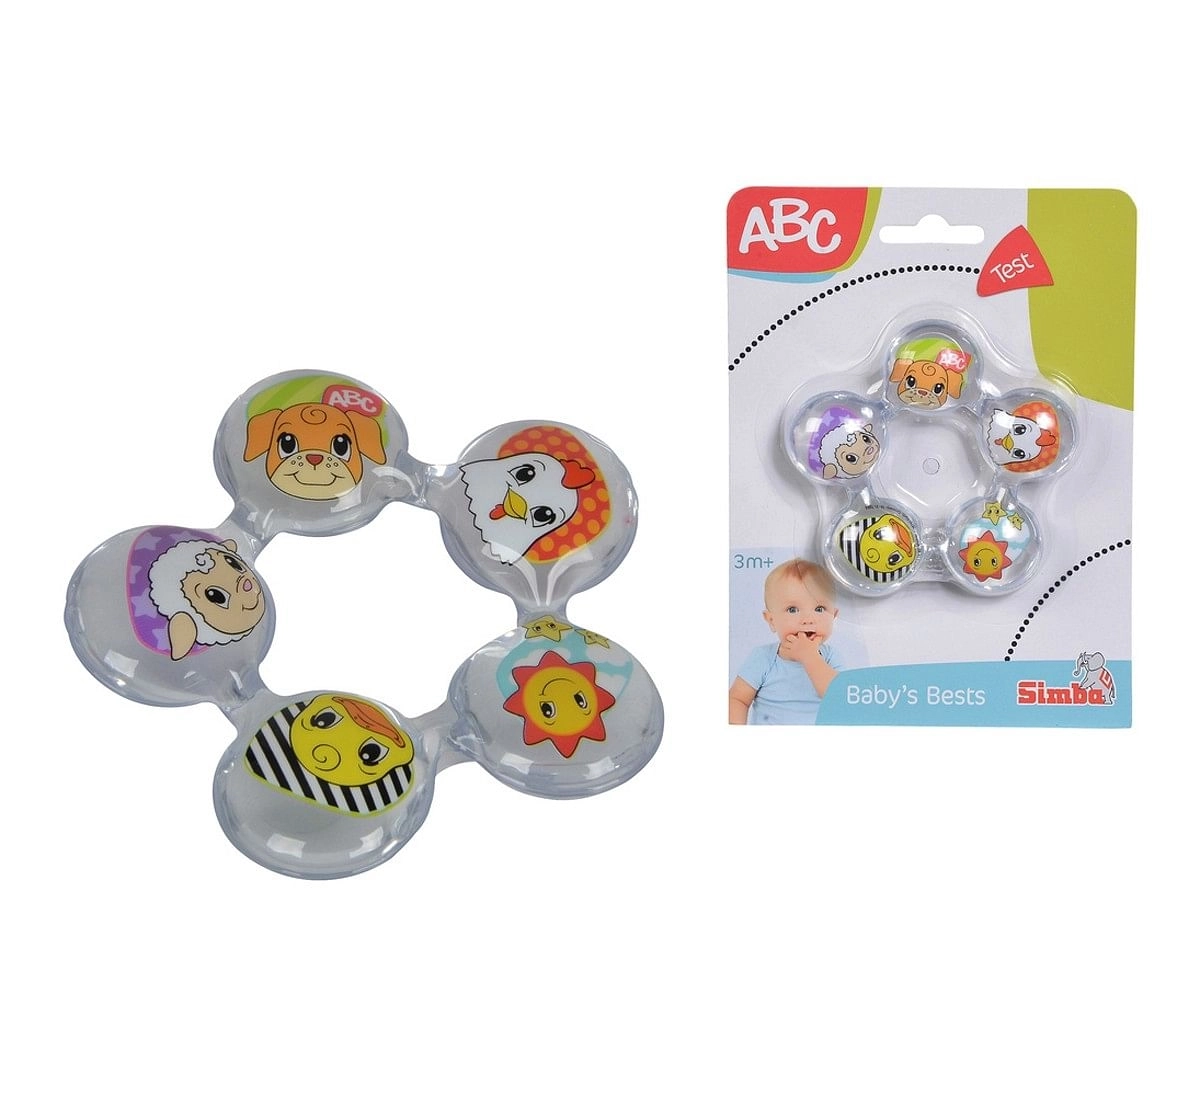 Simba ABC Water Filled Teething Ring Infant toys Multicolor 3M+